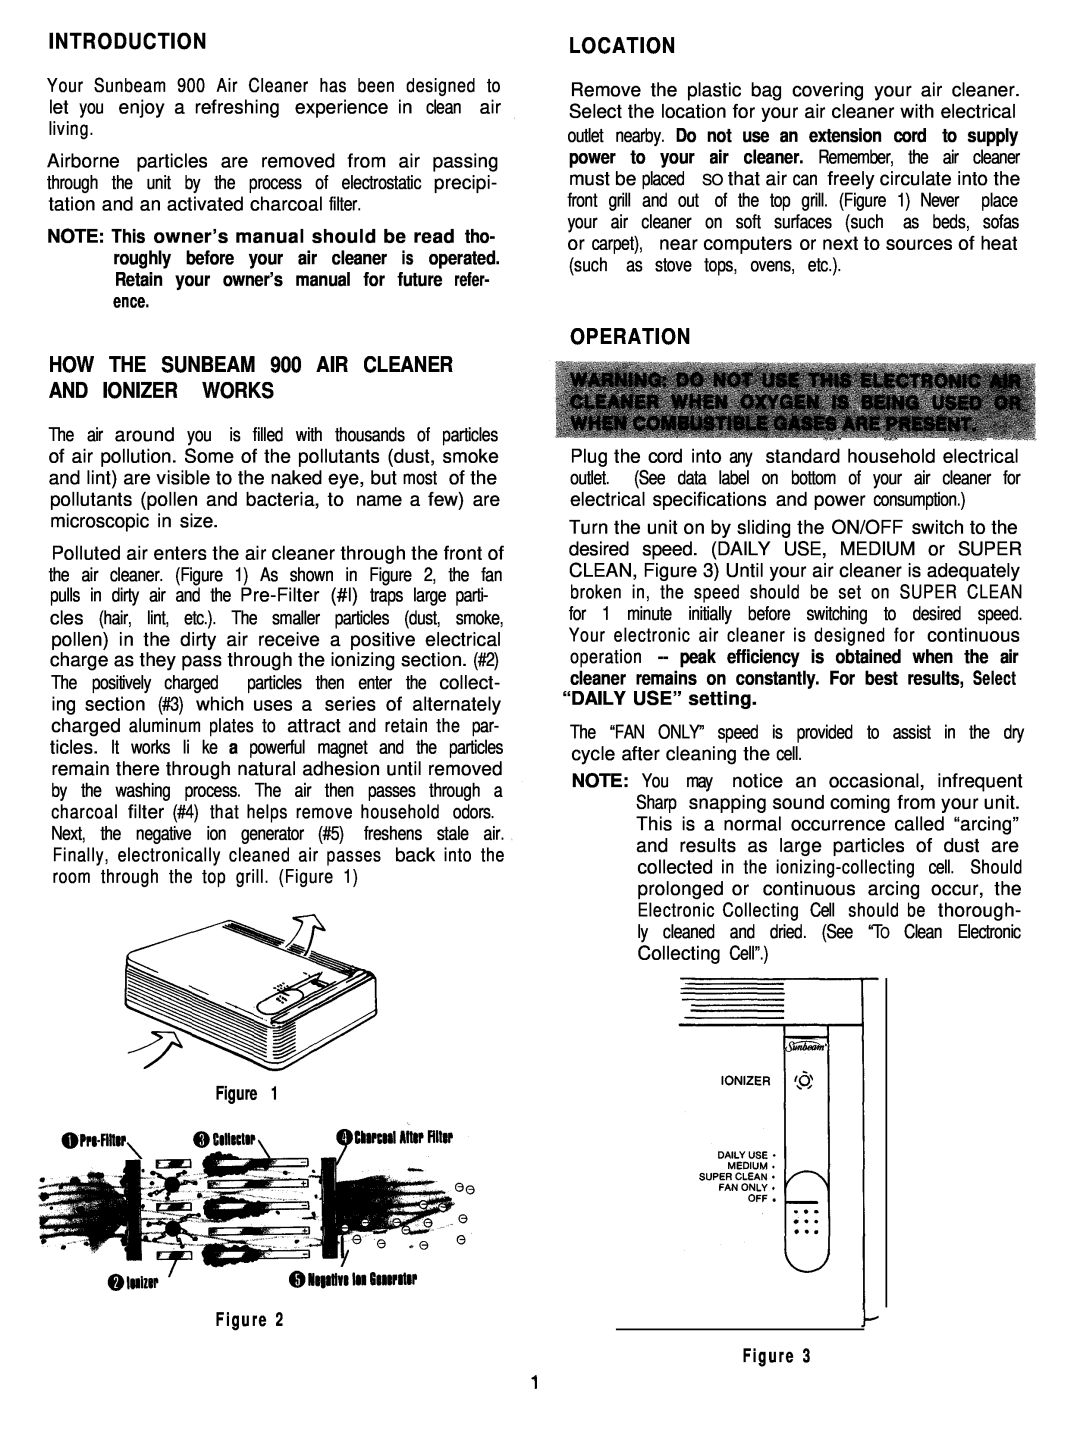 Sunbeam 2571 owner manual Introduction, HOW THE SUNBEAM 900 AIR CLEANER AND IONIZER WORKS, Location, Operation 